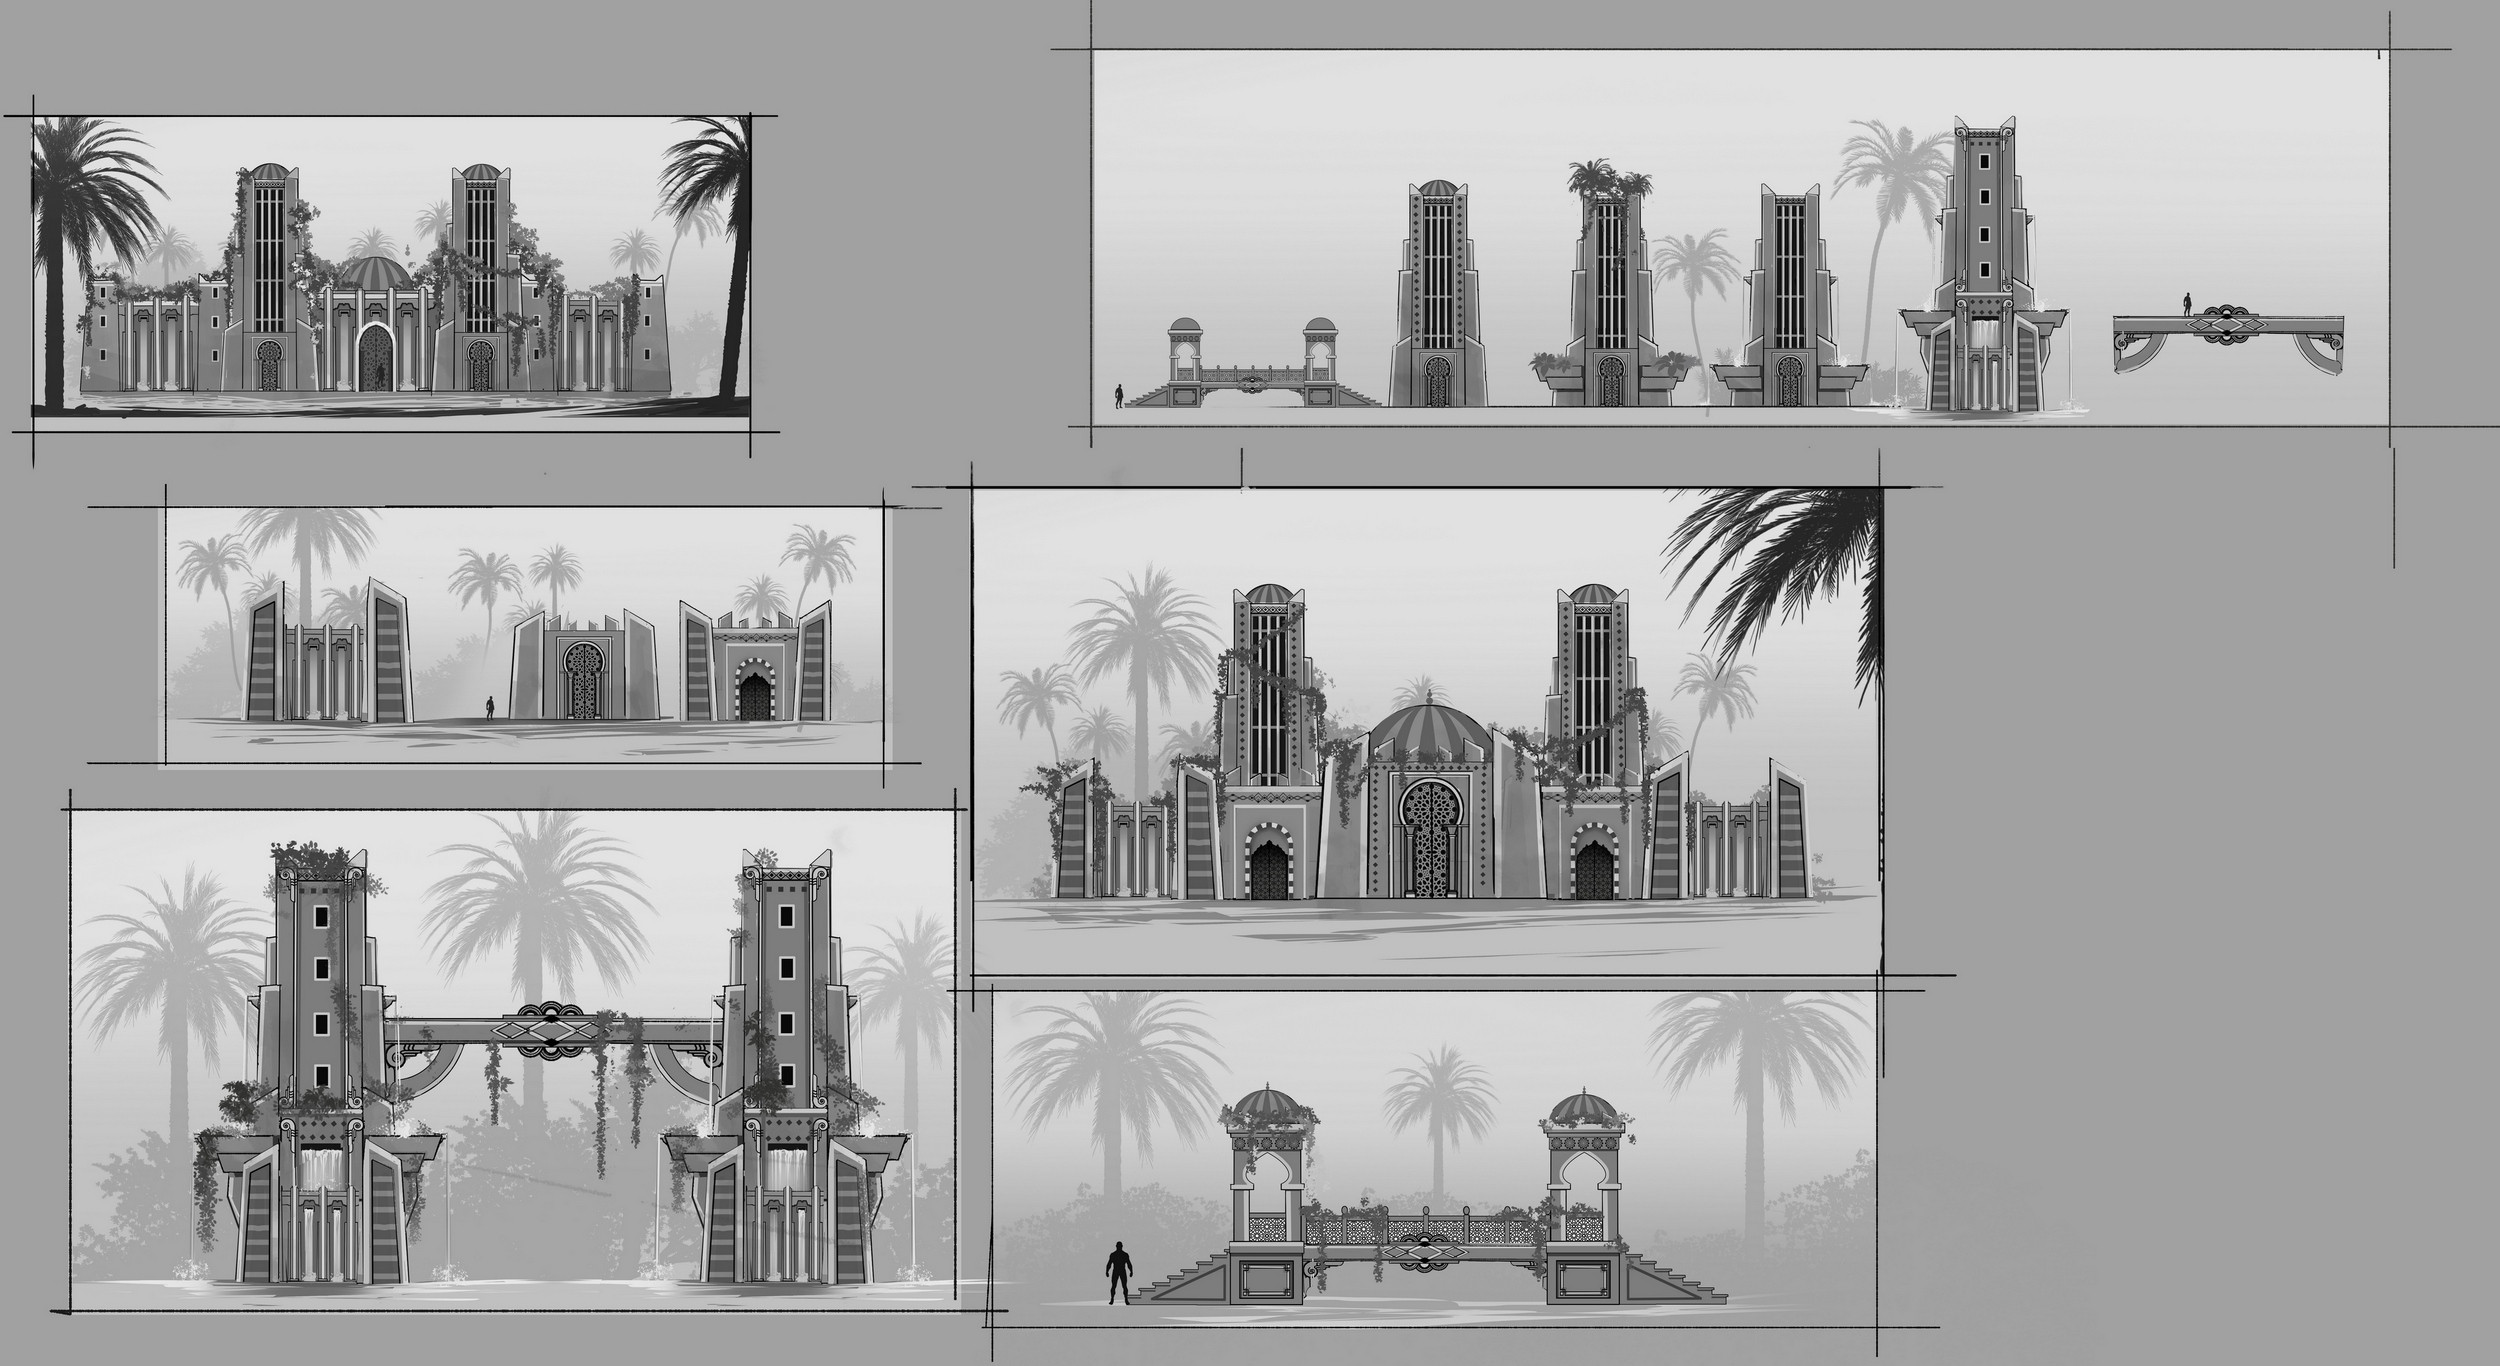 Some black and white sketches done before the concept .